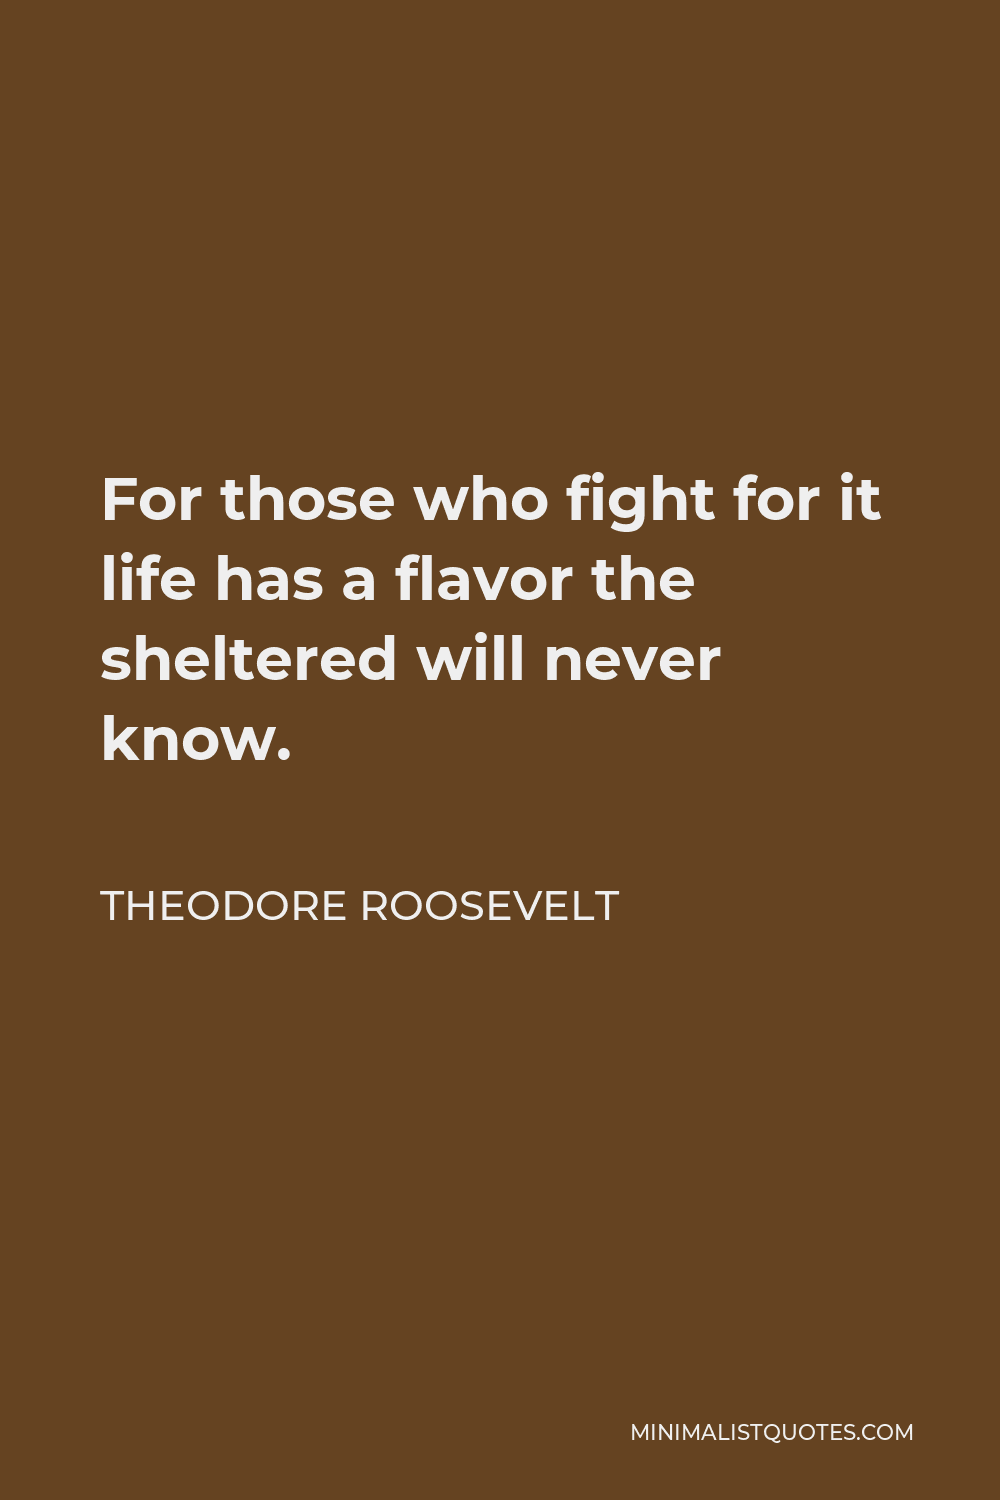 Theodore Roosevelt Quote - For those who fight for it life has a flavor the sheltered will never know.